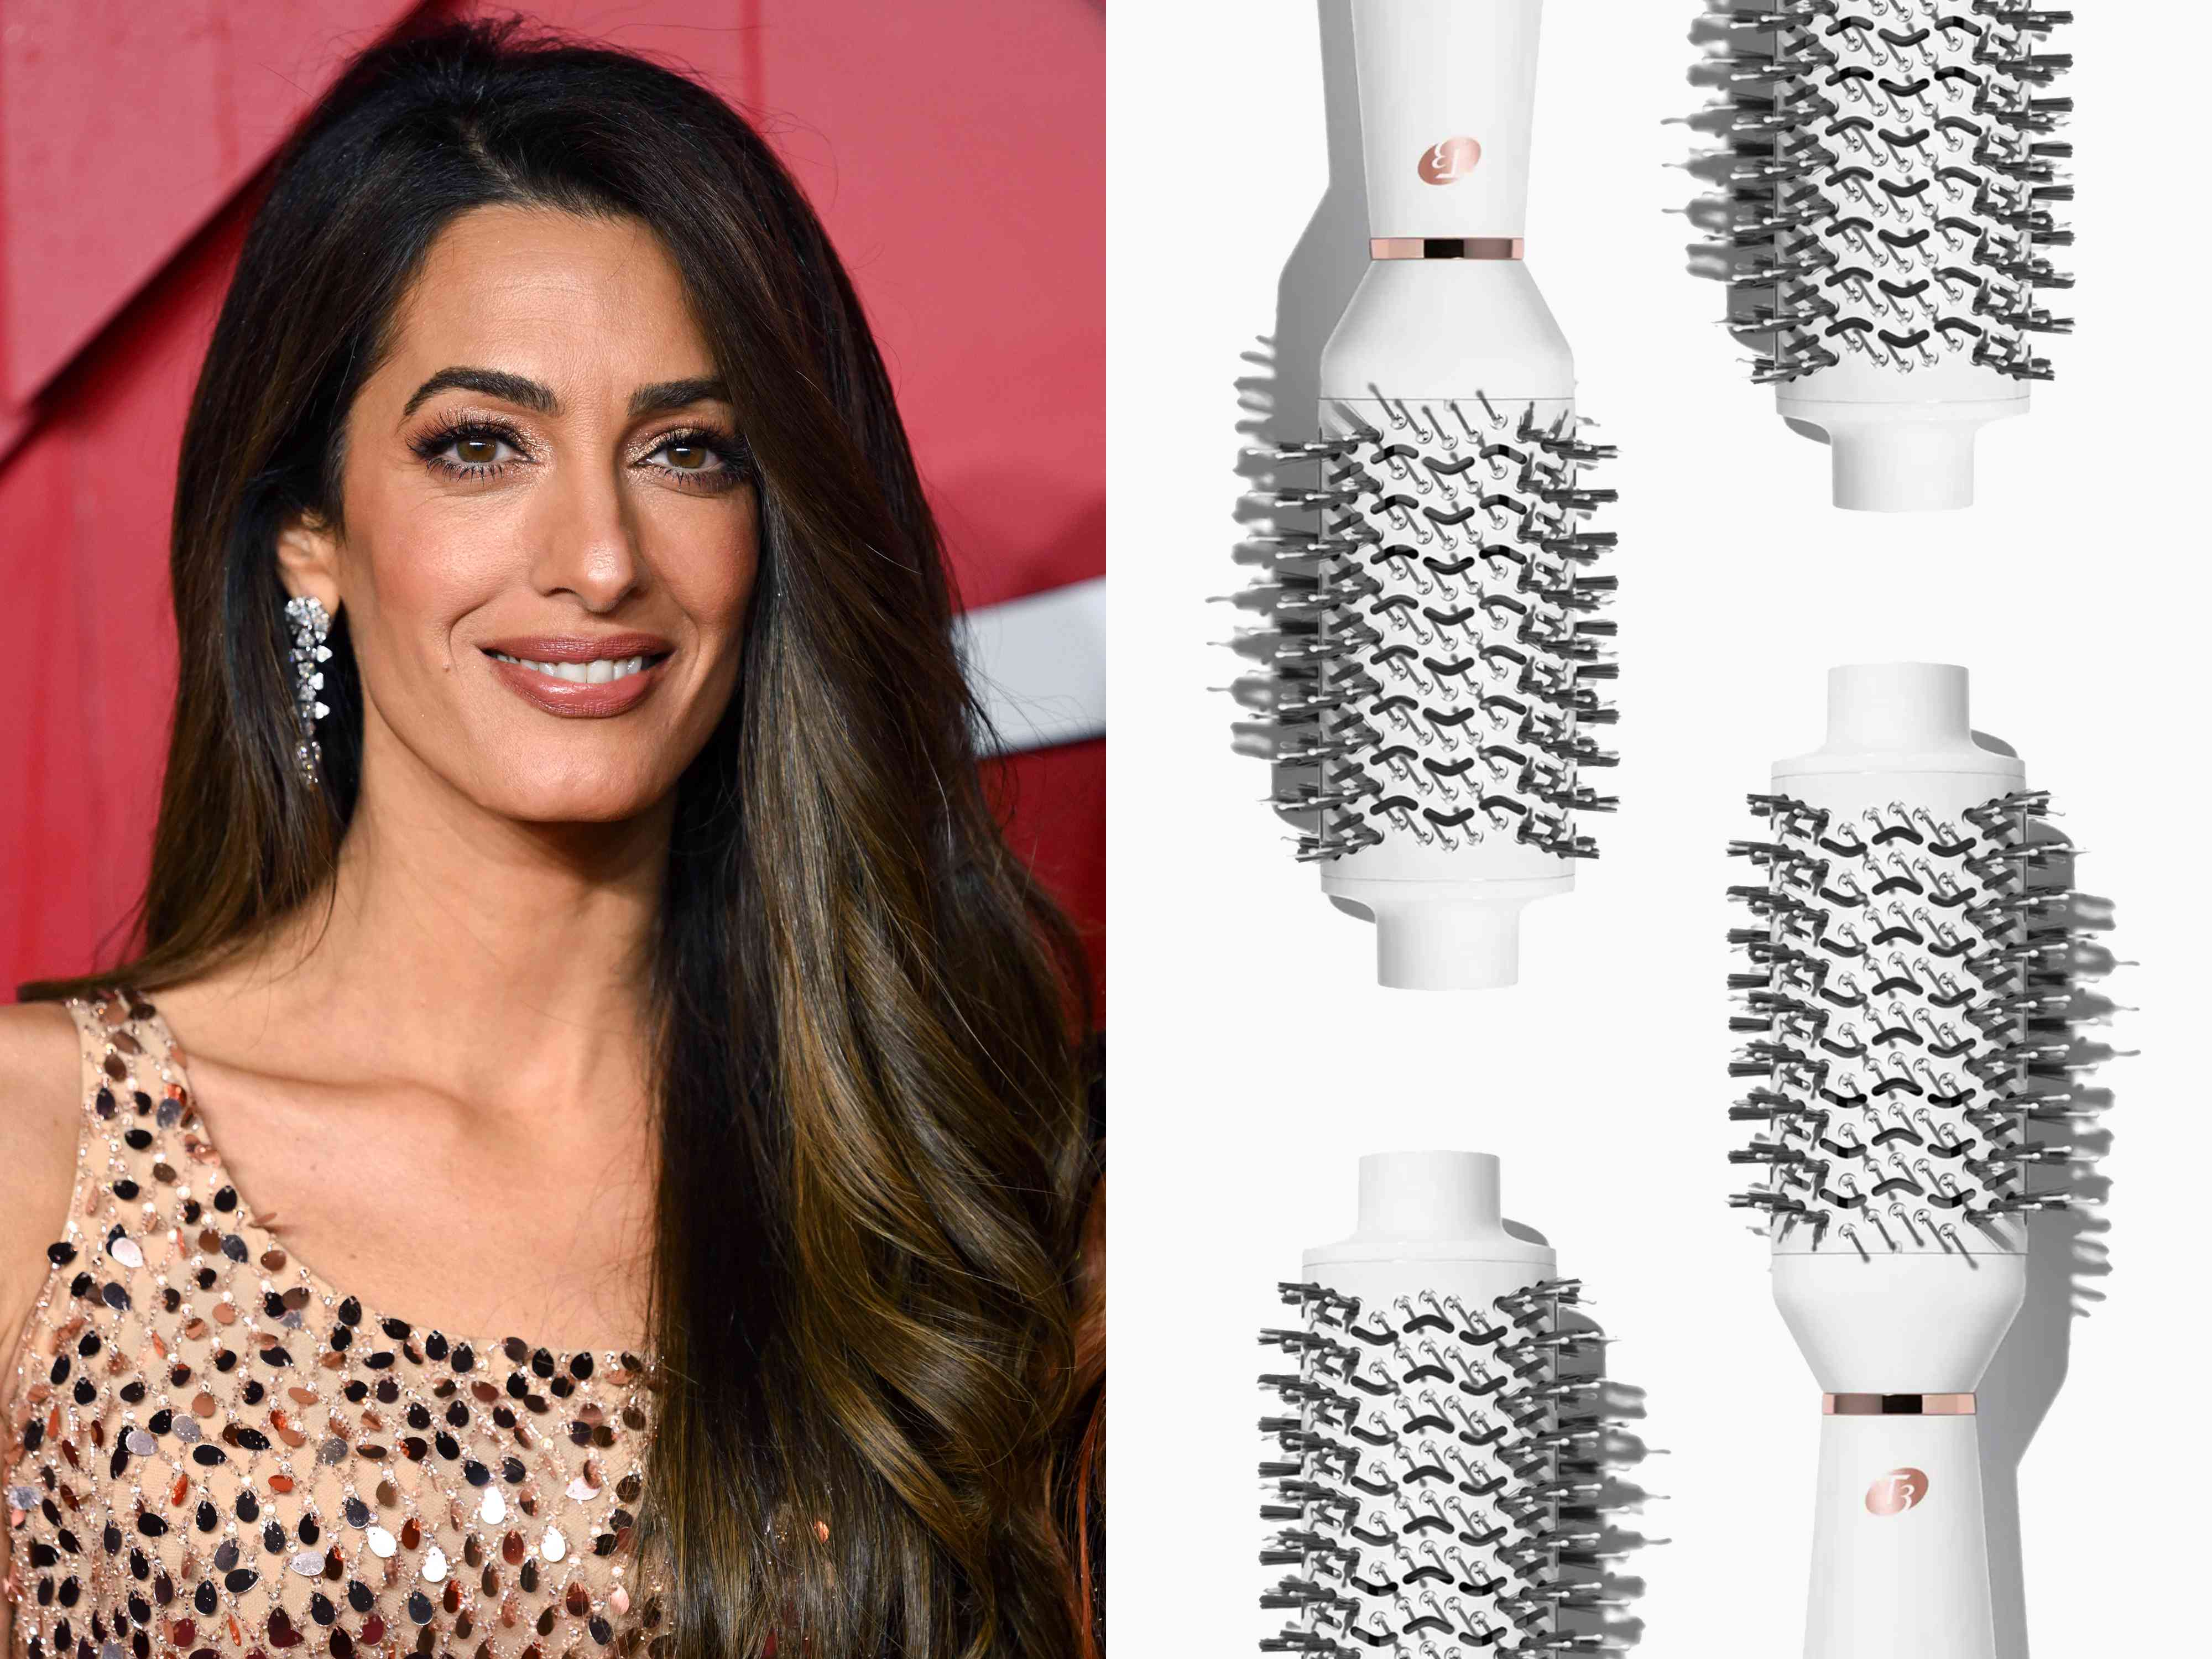 My Mom’s Go-To Hot Air Brush Is From the Same Brand Behind Amal Clooney’s Sleek Strands